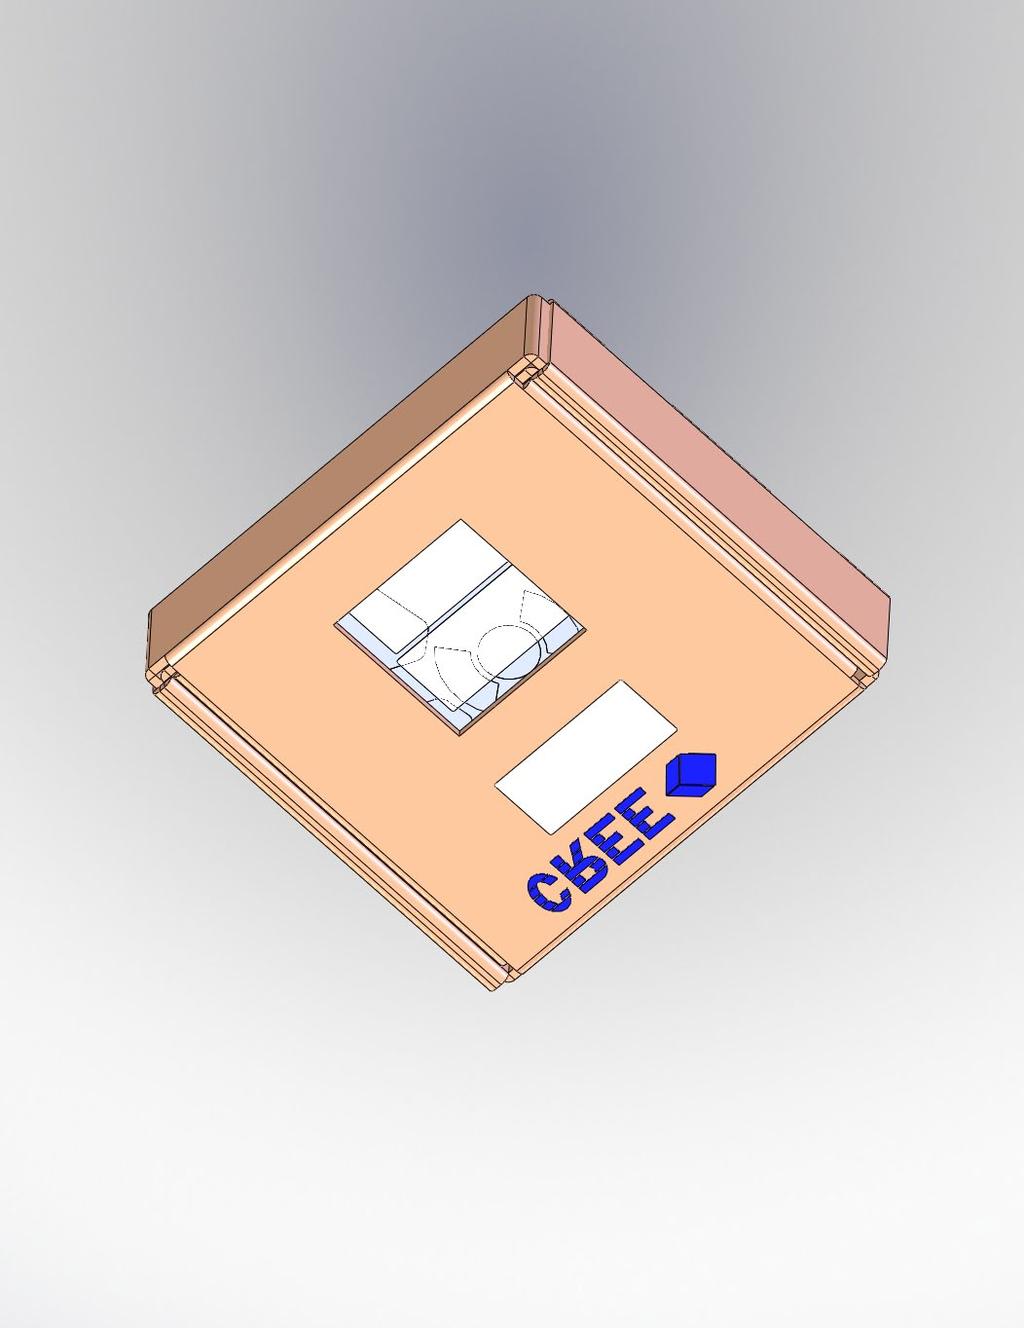 Cree Bin Code, Quantity, Reel ID Boxed Reel Label with Cree,